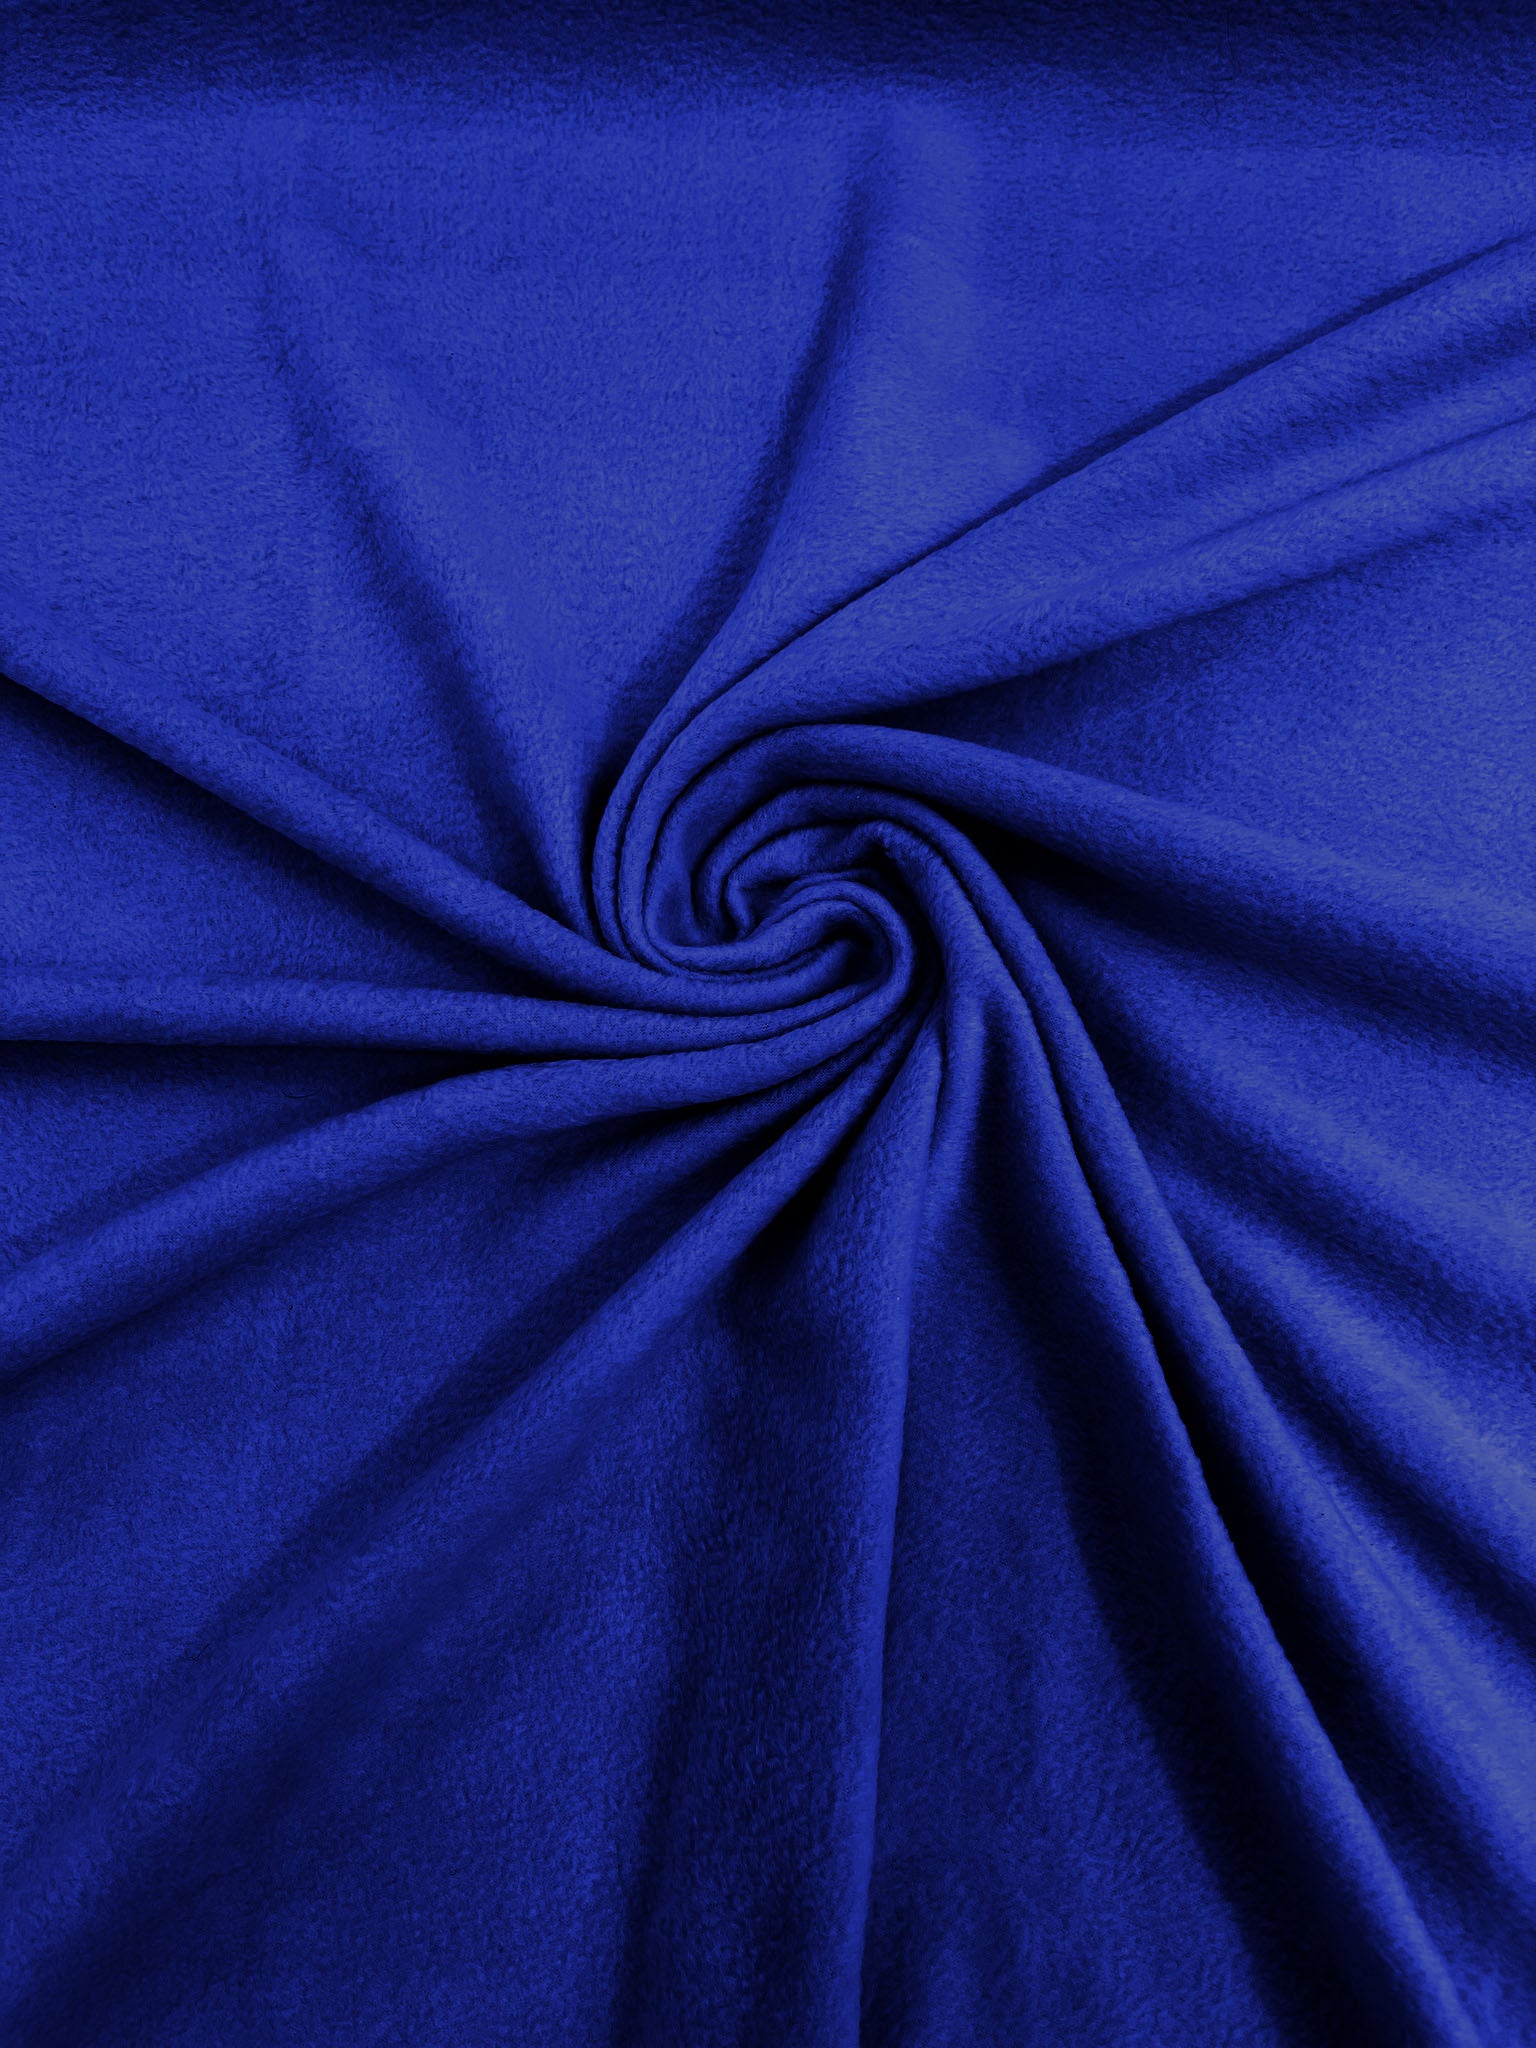 Royal Blue Solid Polar Fleece Fabric Anti-Pill 58" Wide Sold by The Yard